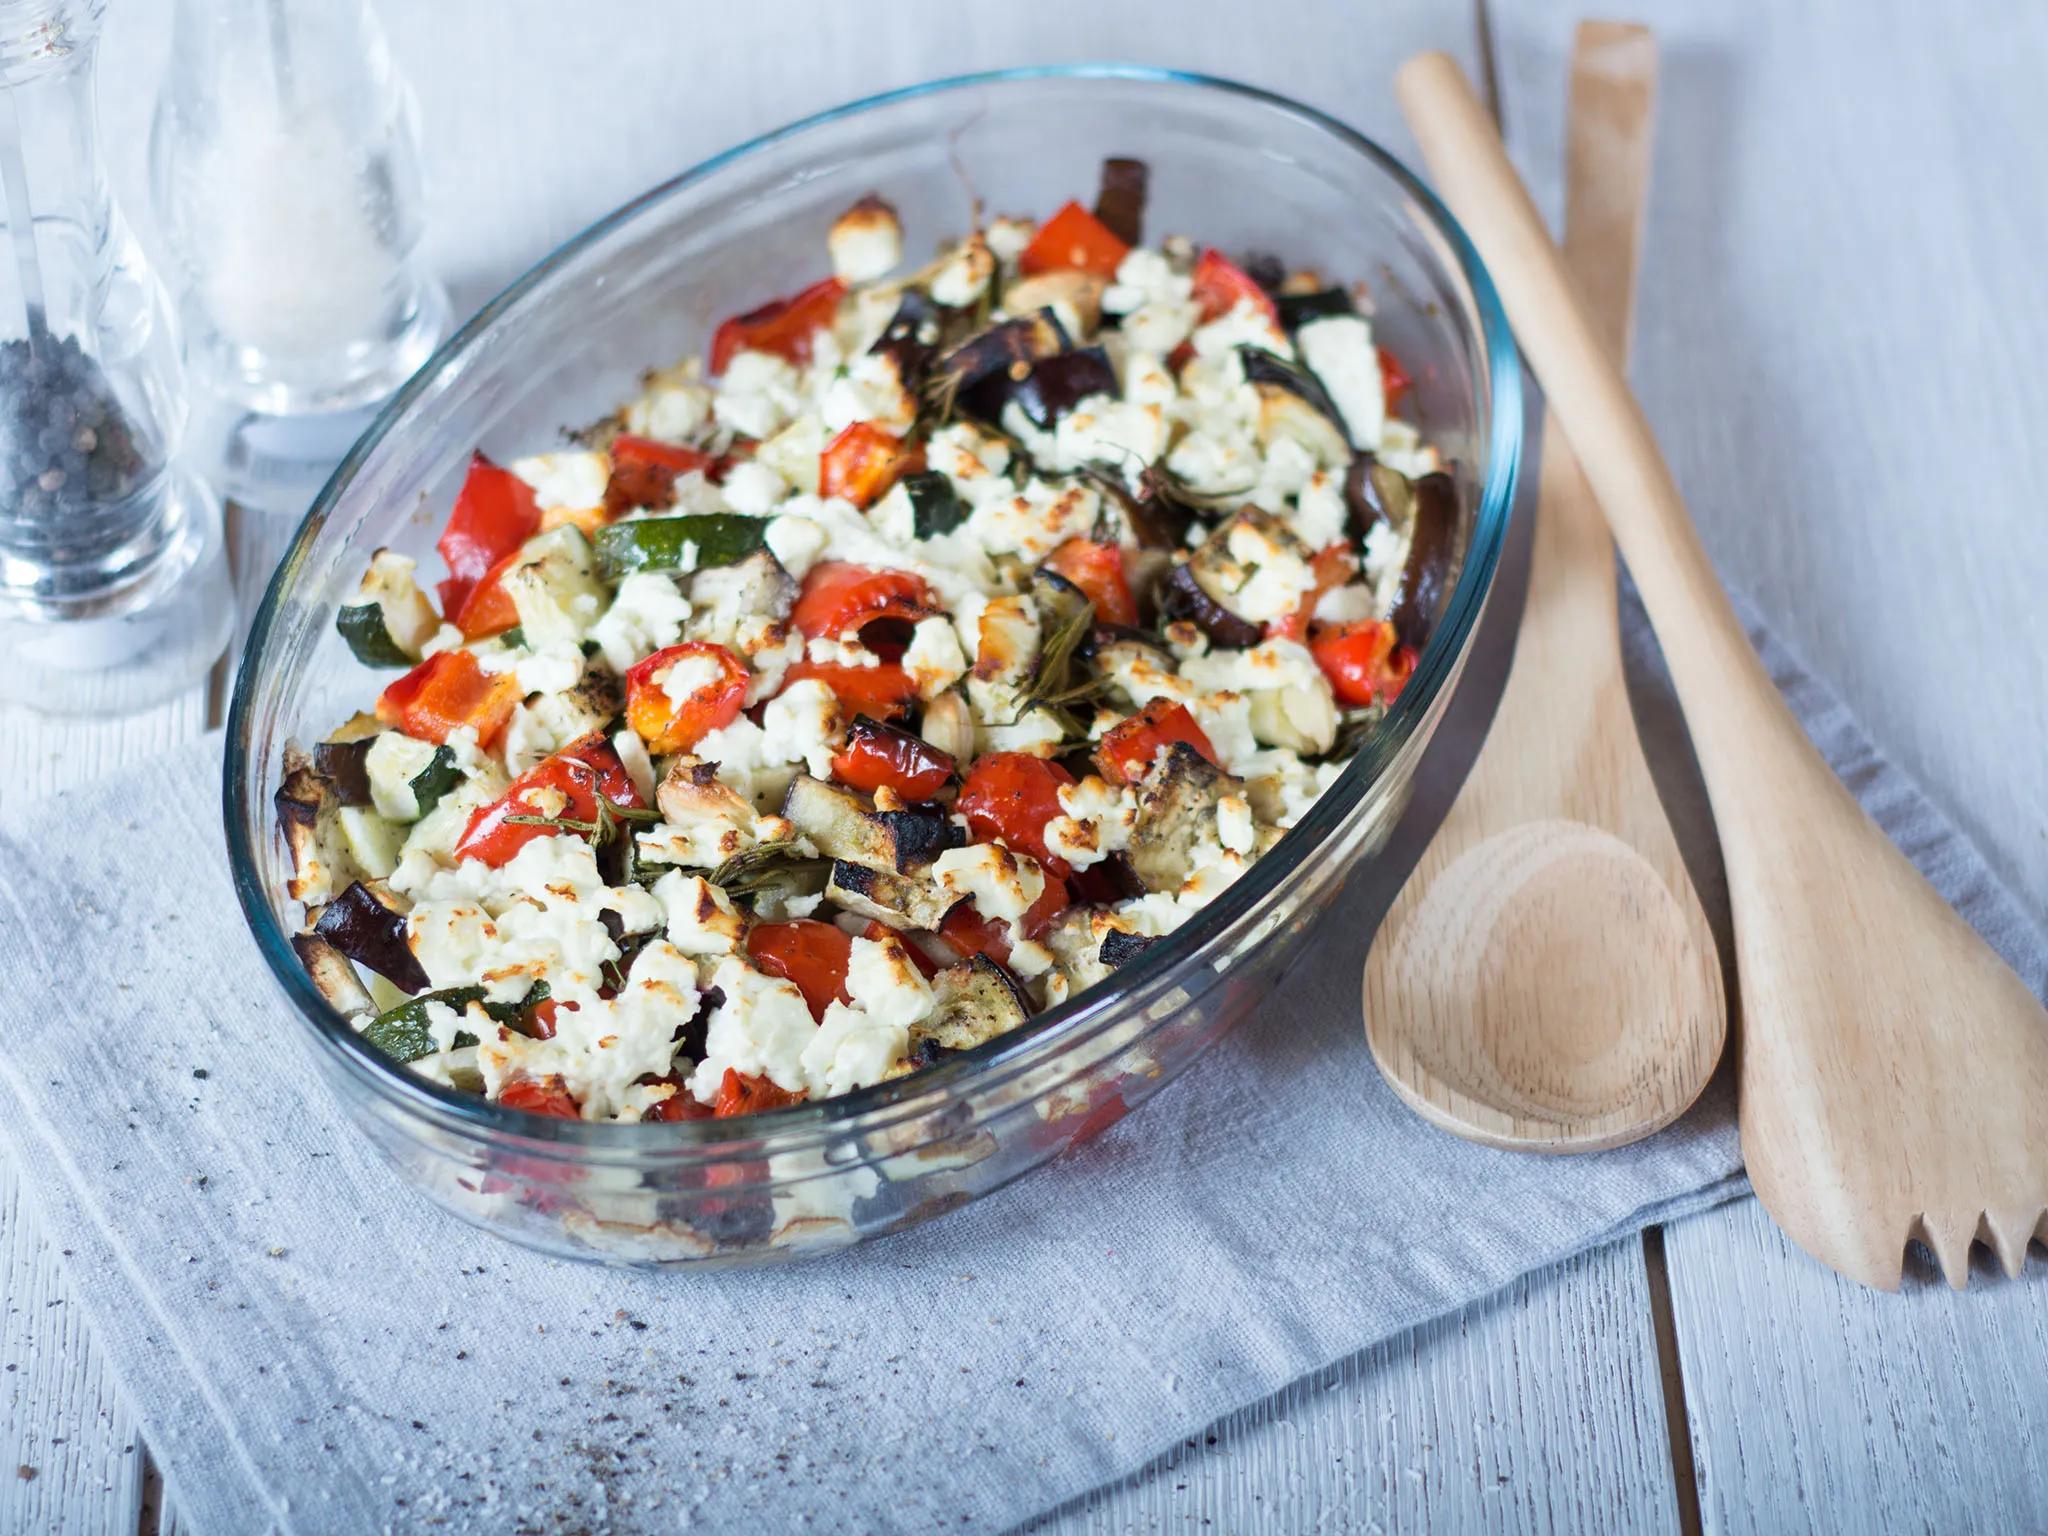 Oven ratatouille with feta - Dining and Cooking